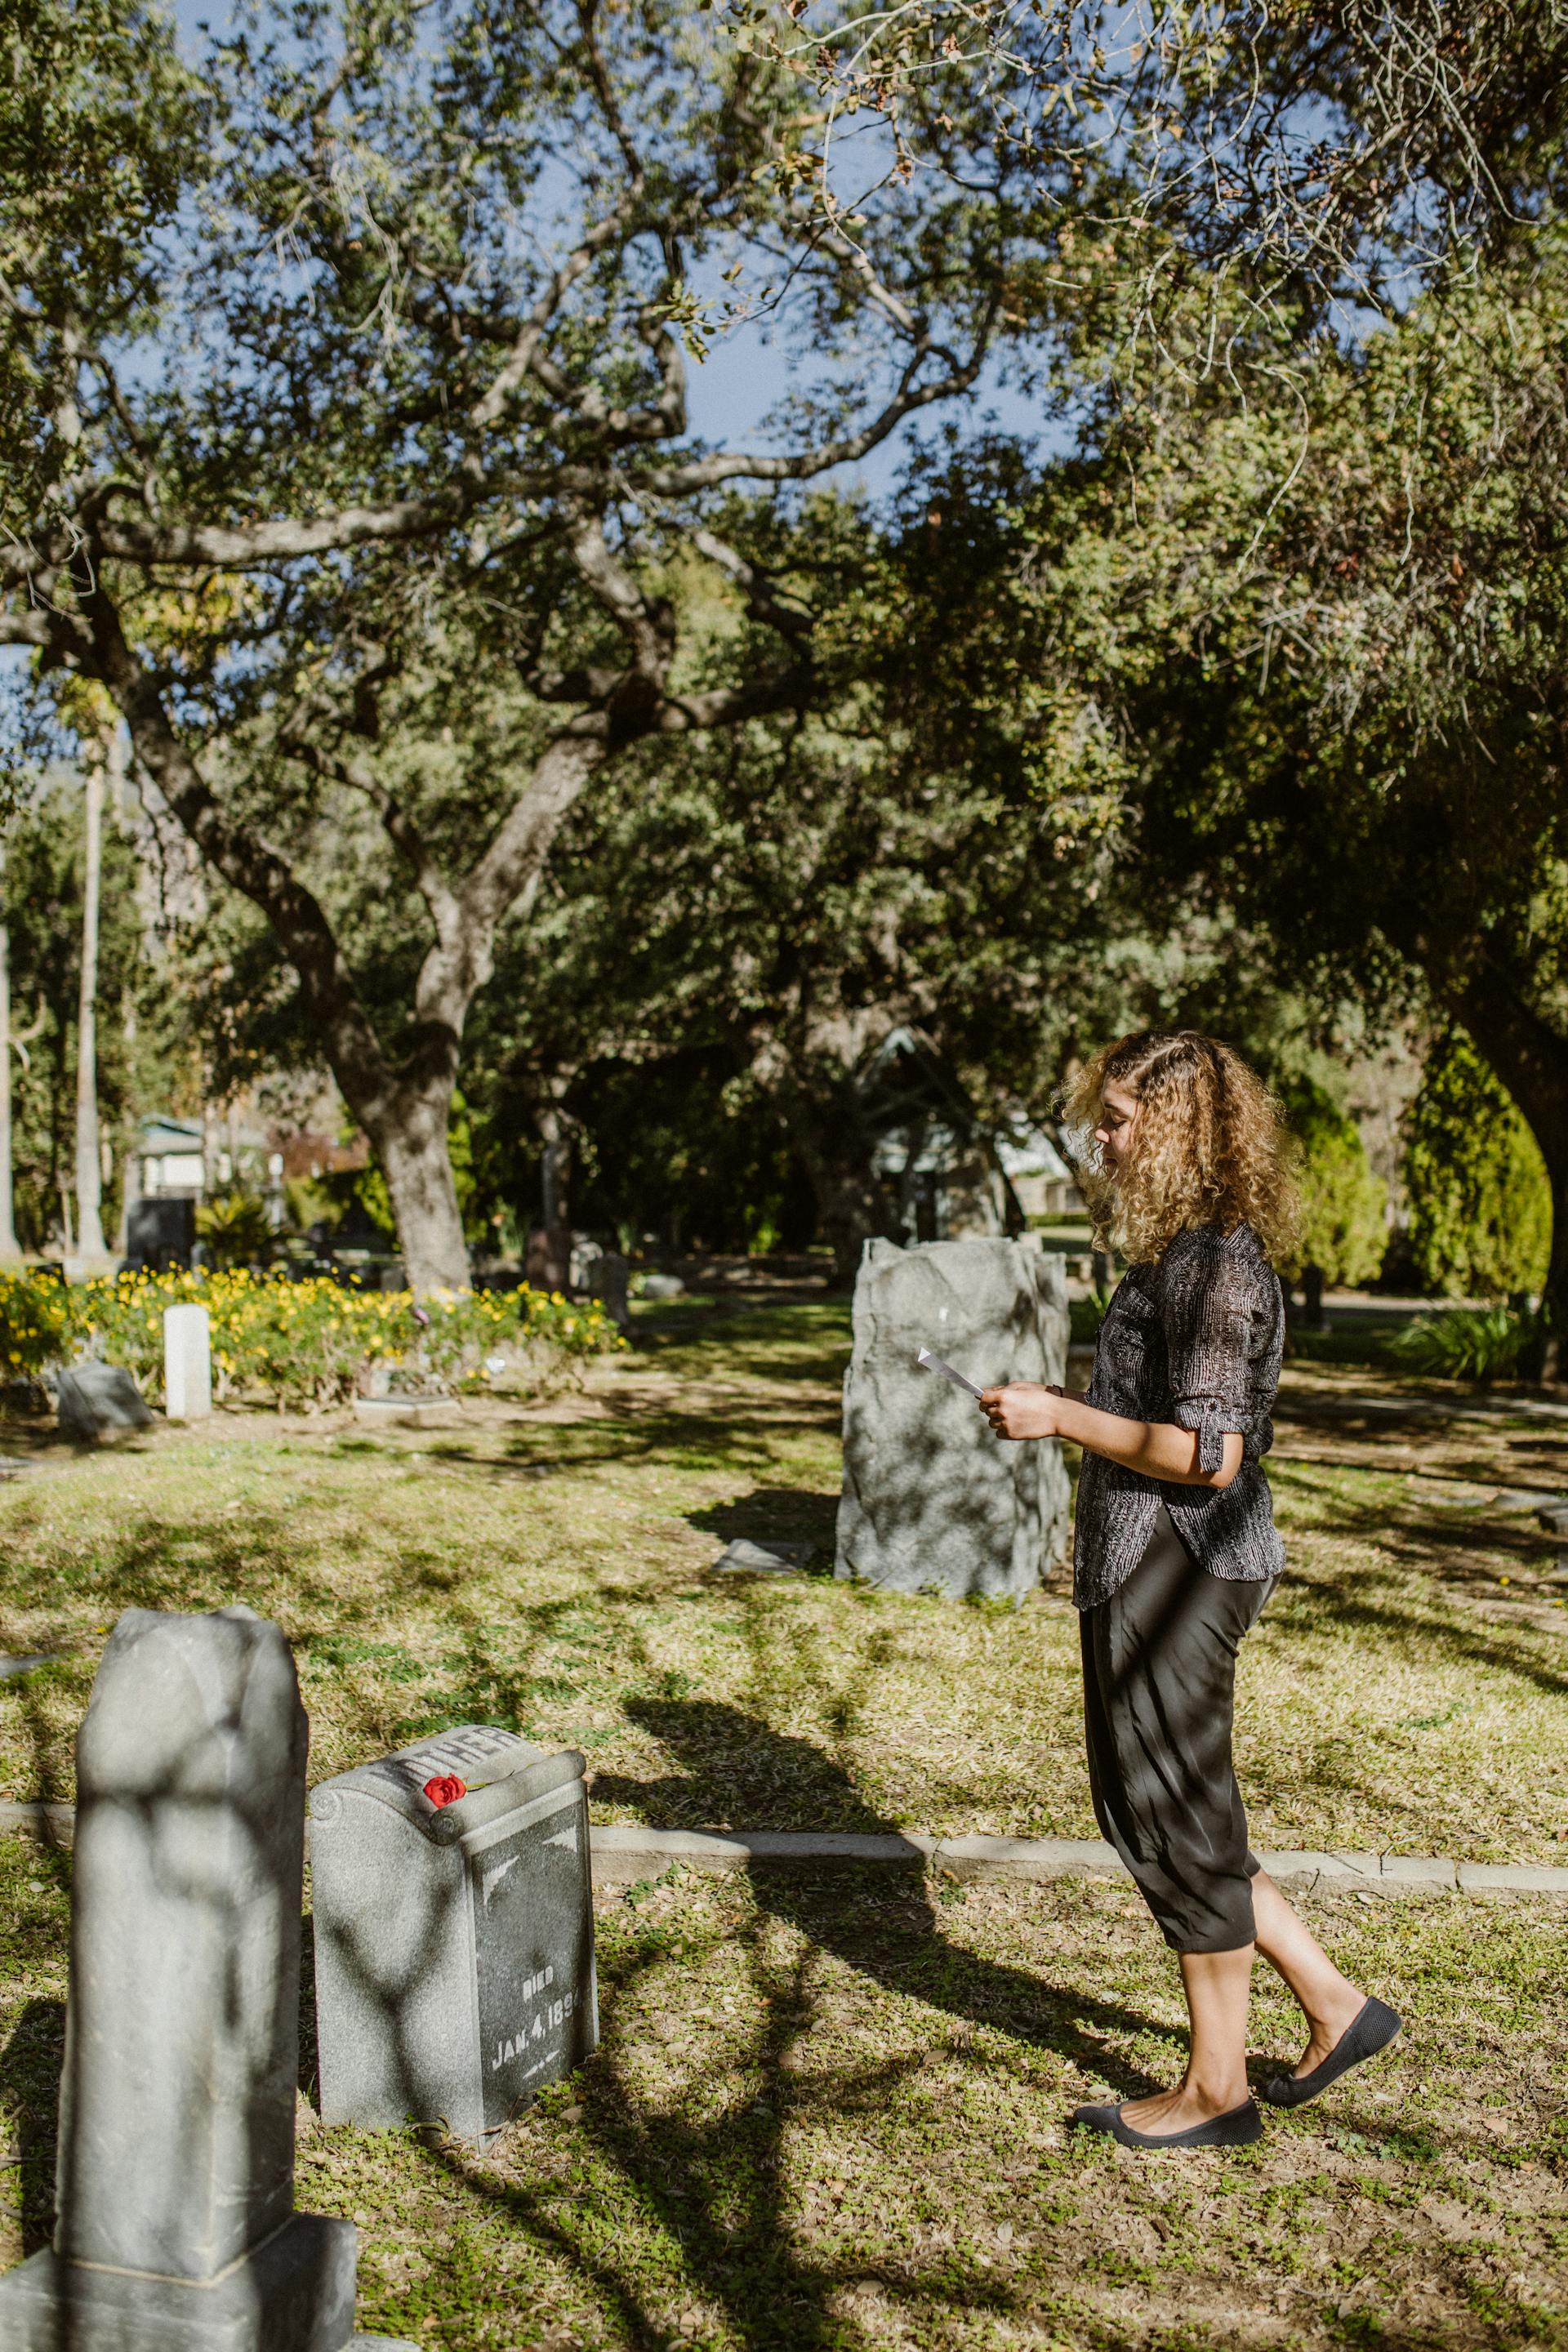 A woman at a cemetery | Source: Pexels